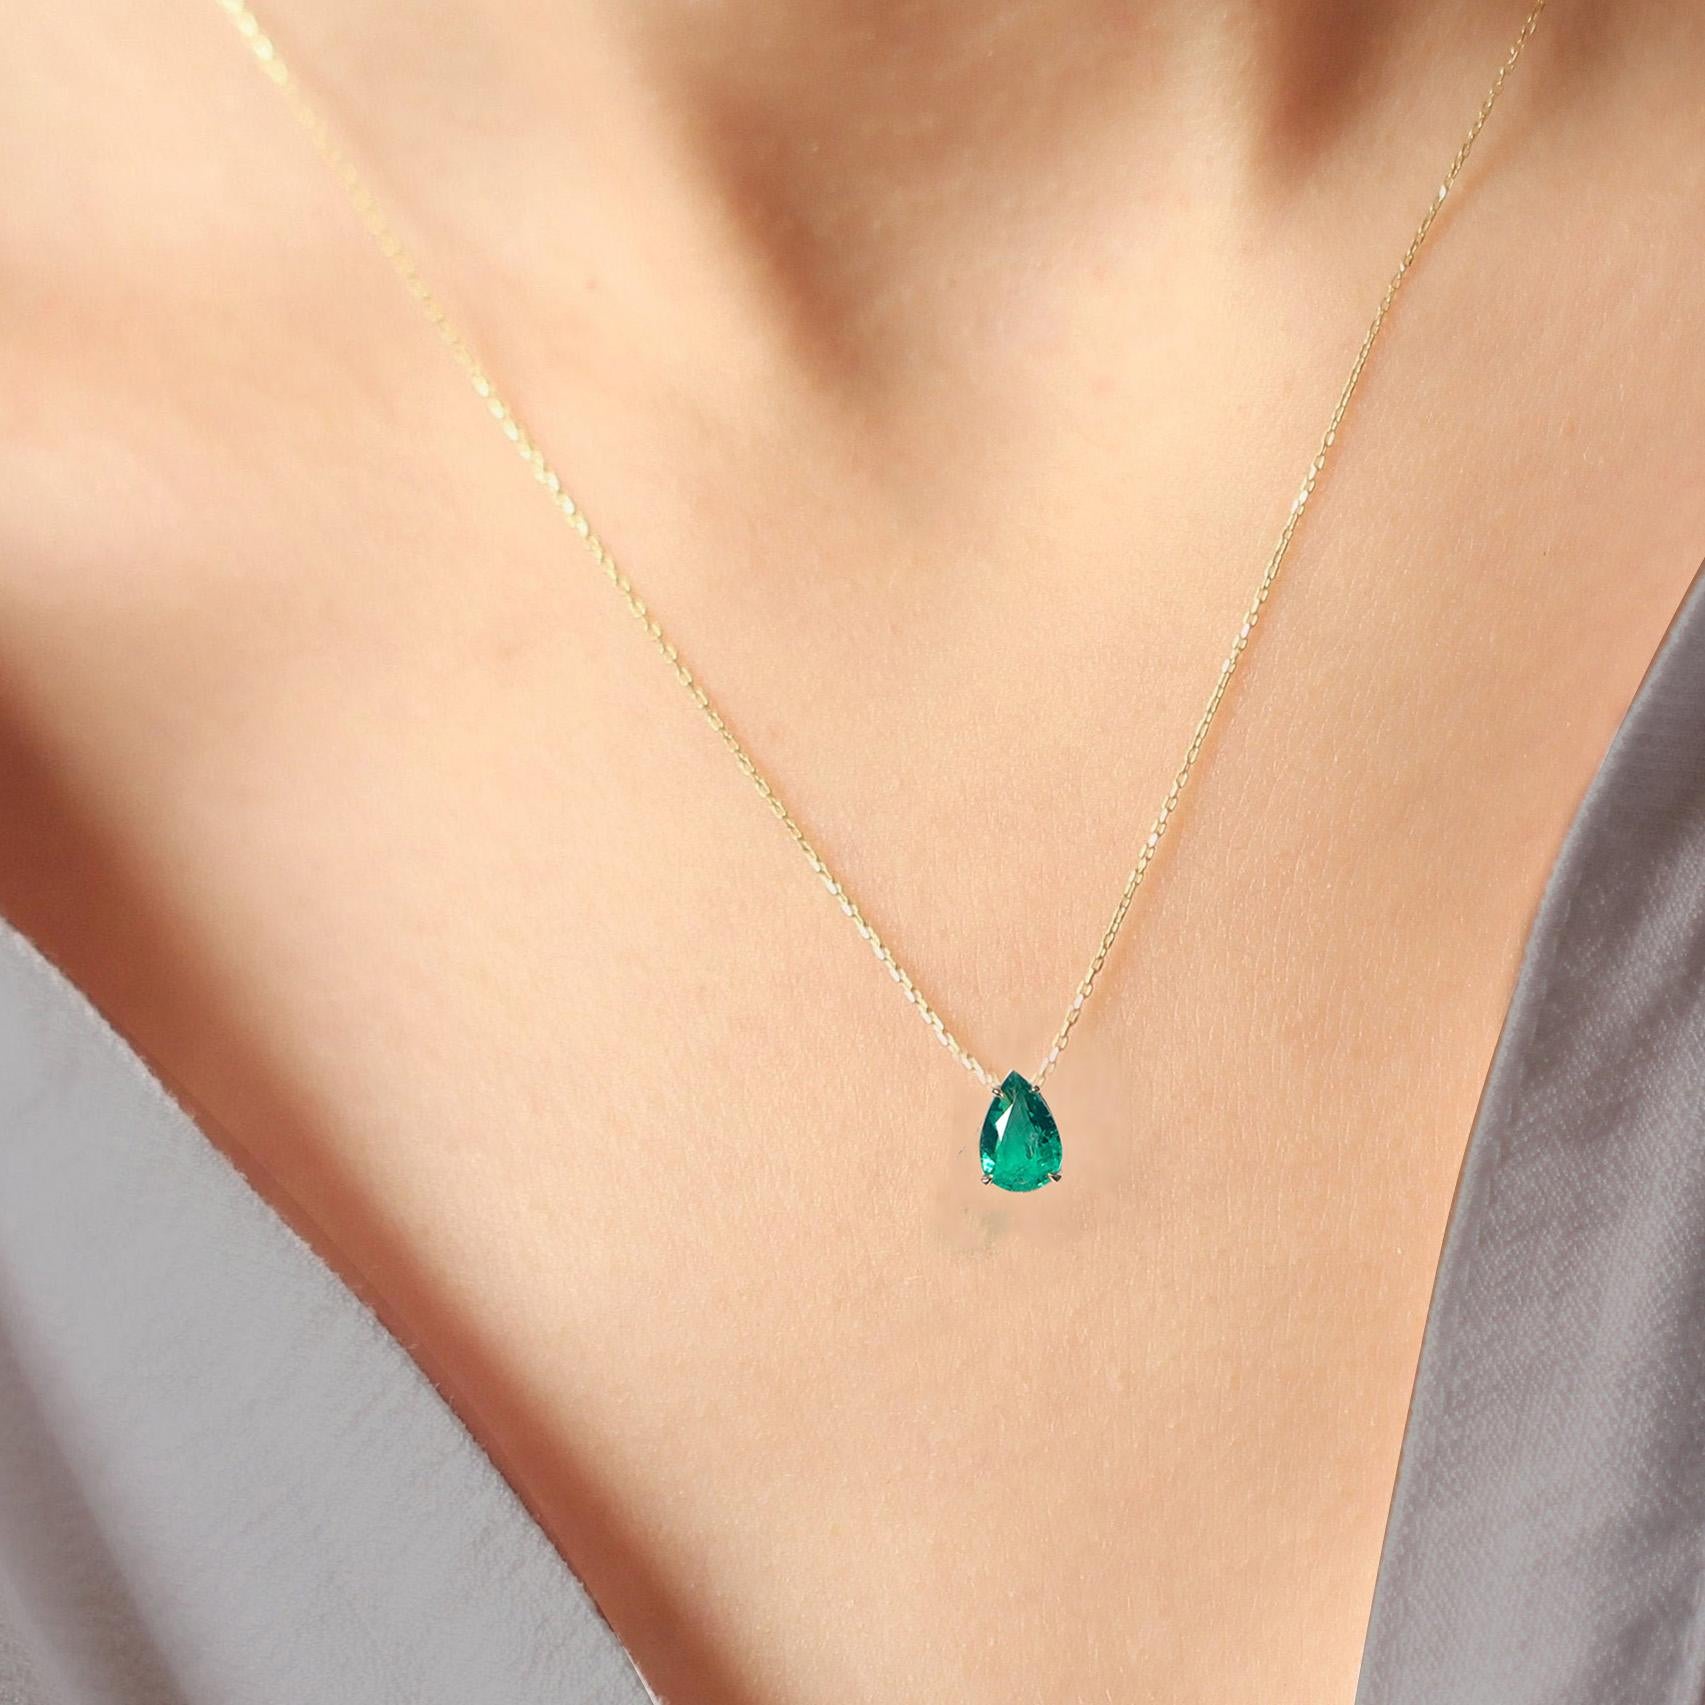 Pear Cut 18K Yellow Gold Necklaces With Emerald 1.26 ct. For Sale